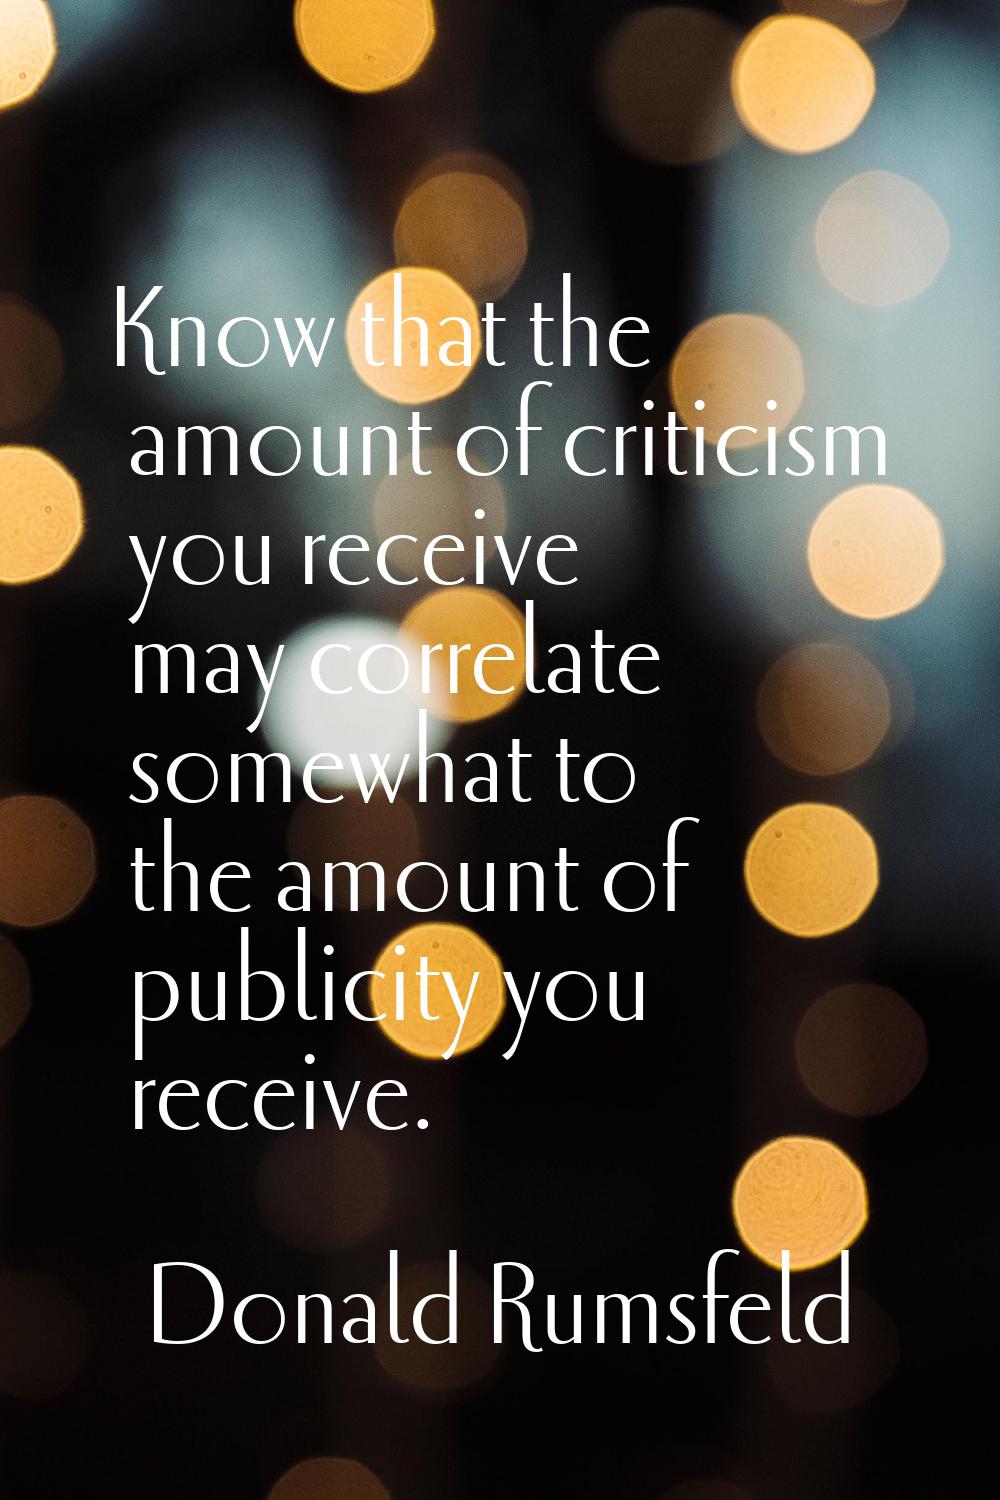 Know that the amount of criticism you receive may correlate somewhat to the amount of publicity you